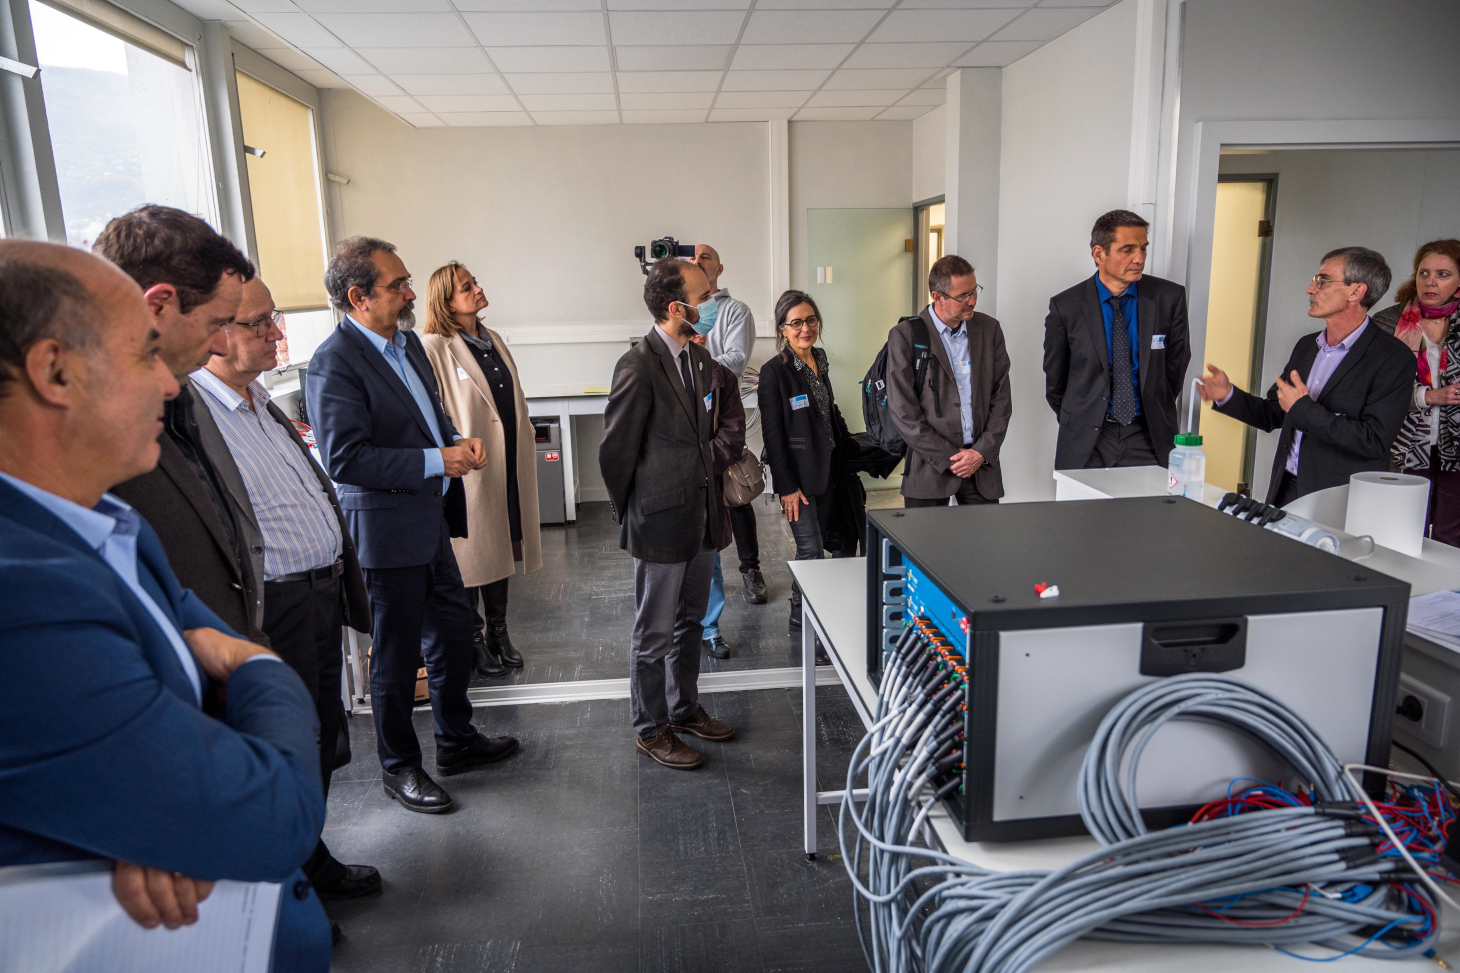 Guided tour of the new laboratory by Renaud Bouchet, co-director of LI2, with Samy Sisaid, sub-prefect of the Isère region, and all the partners, including Richard Bouveret, president of Blue Solutions, Yassine Lakhnech, president of UGA, and Pierre Benec